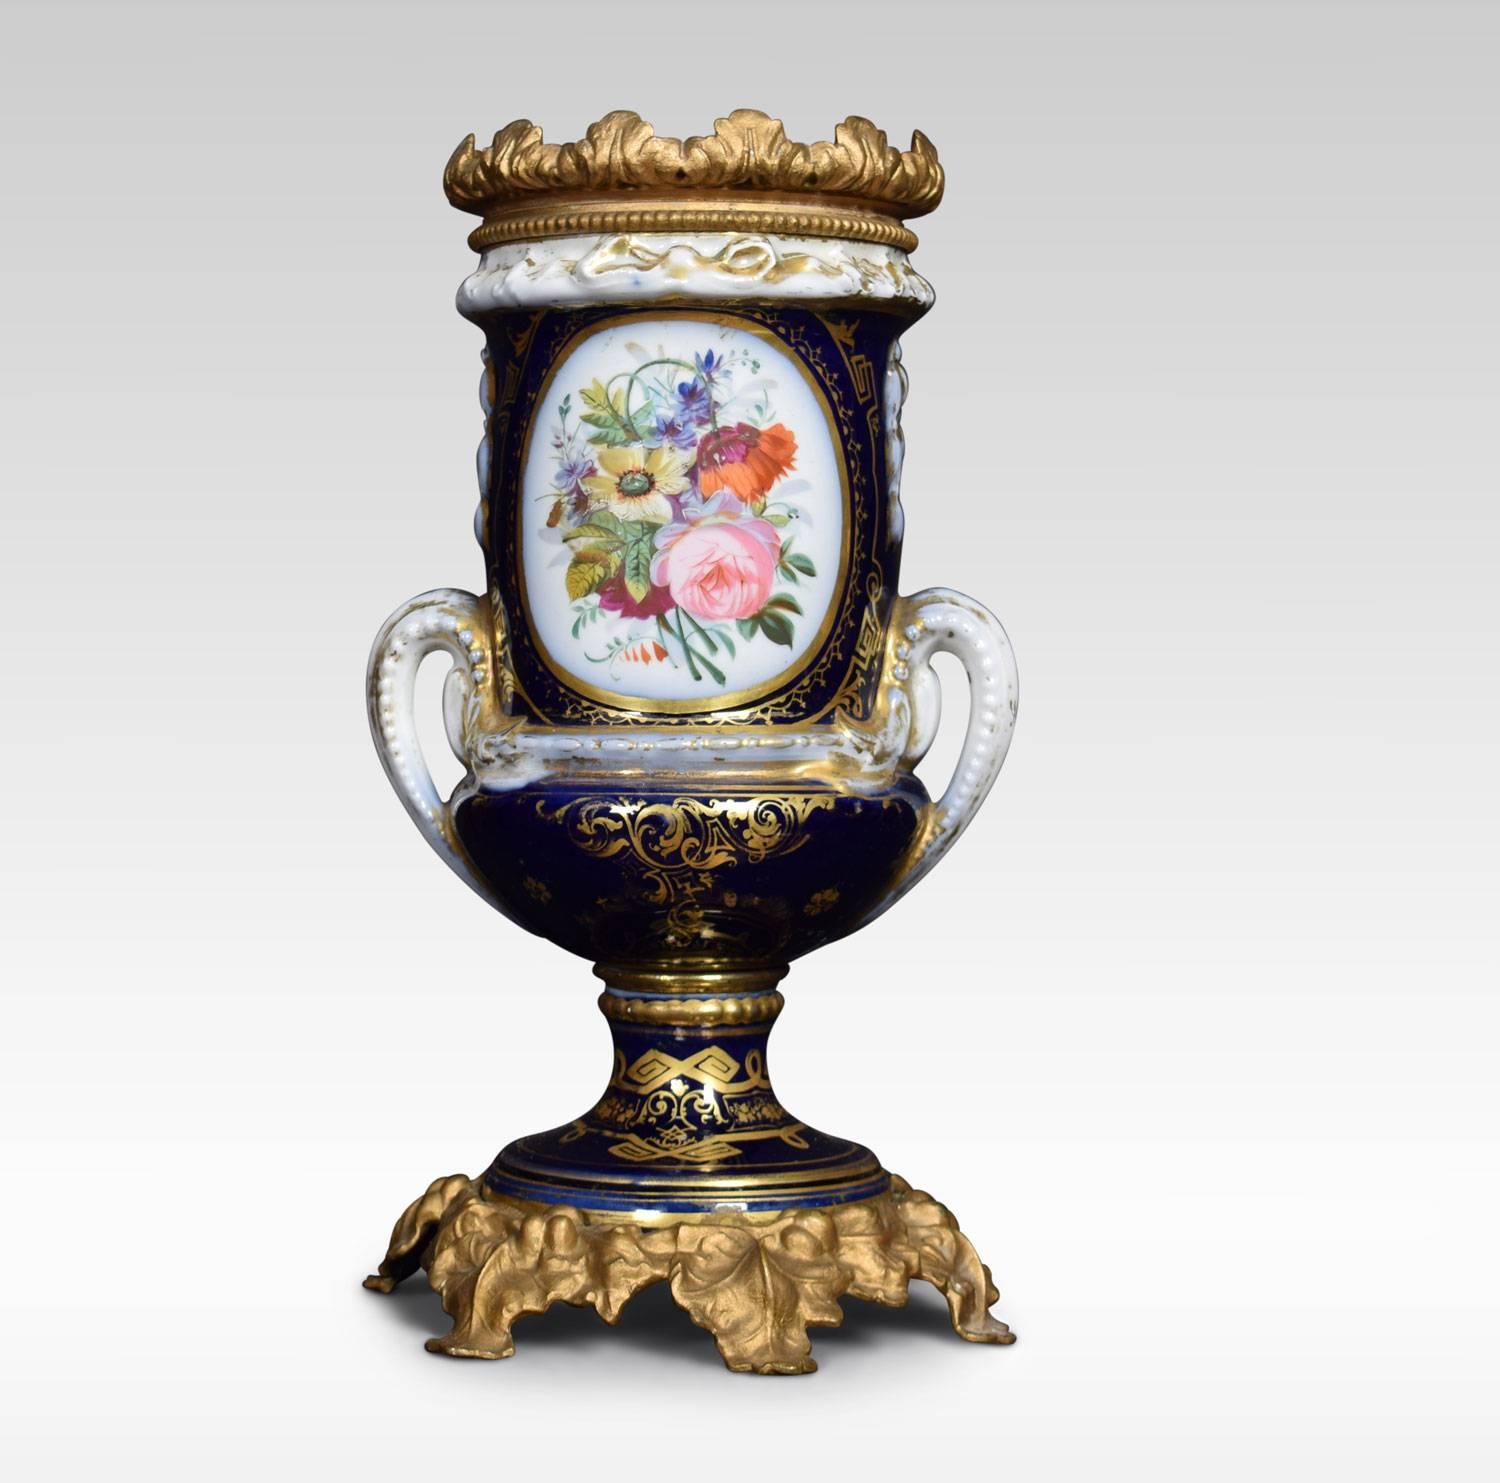 Sevres style twin handle lamp base, hand-painted in cobalt with gold detail. Featuring a central 17th century courting couple the opposing side with floral motifs. Raised up on gilt wood base.
Dimensions
Height 13.5 Inches
Width 7 Inches
Depth 7